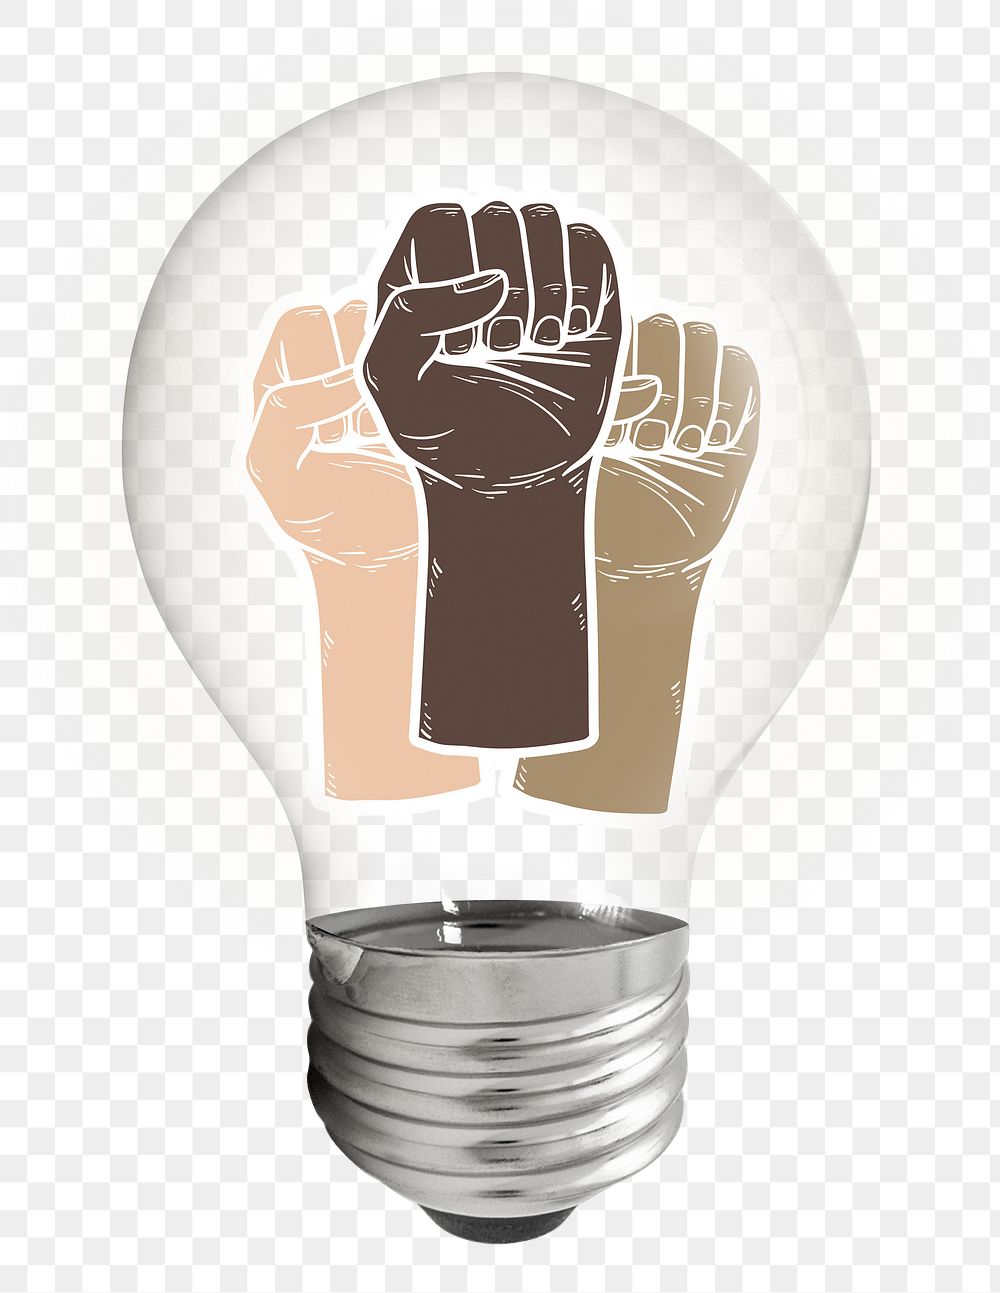 Raised diverse fists png sticker, light bulb BLM support campaign on transparent background